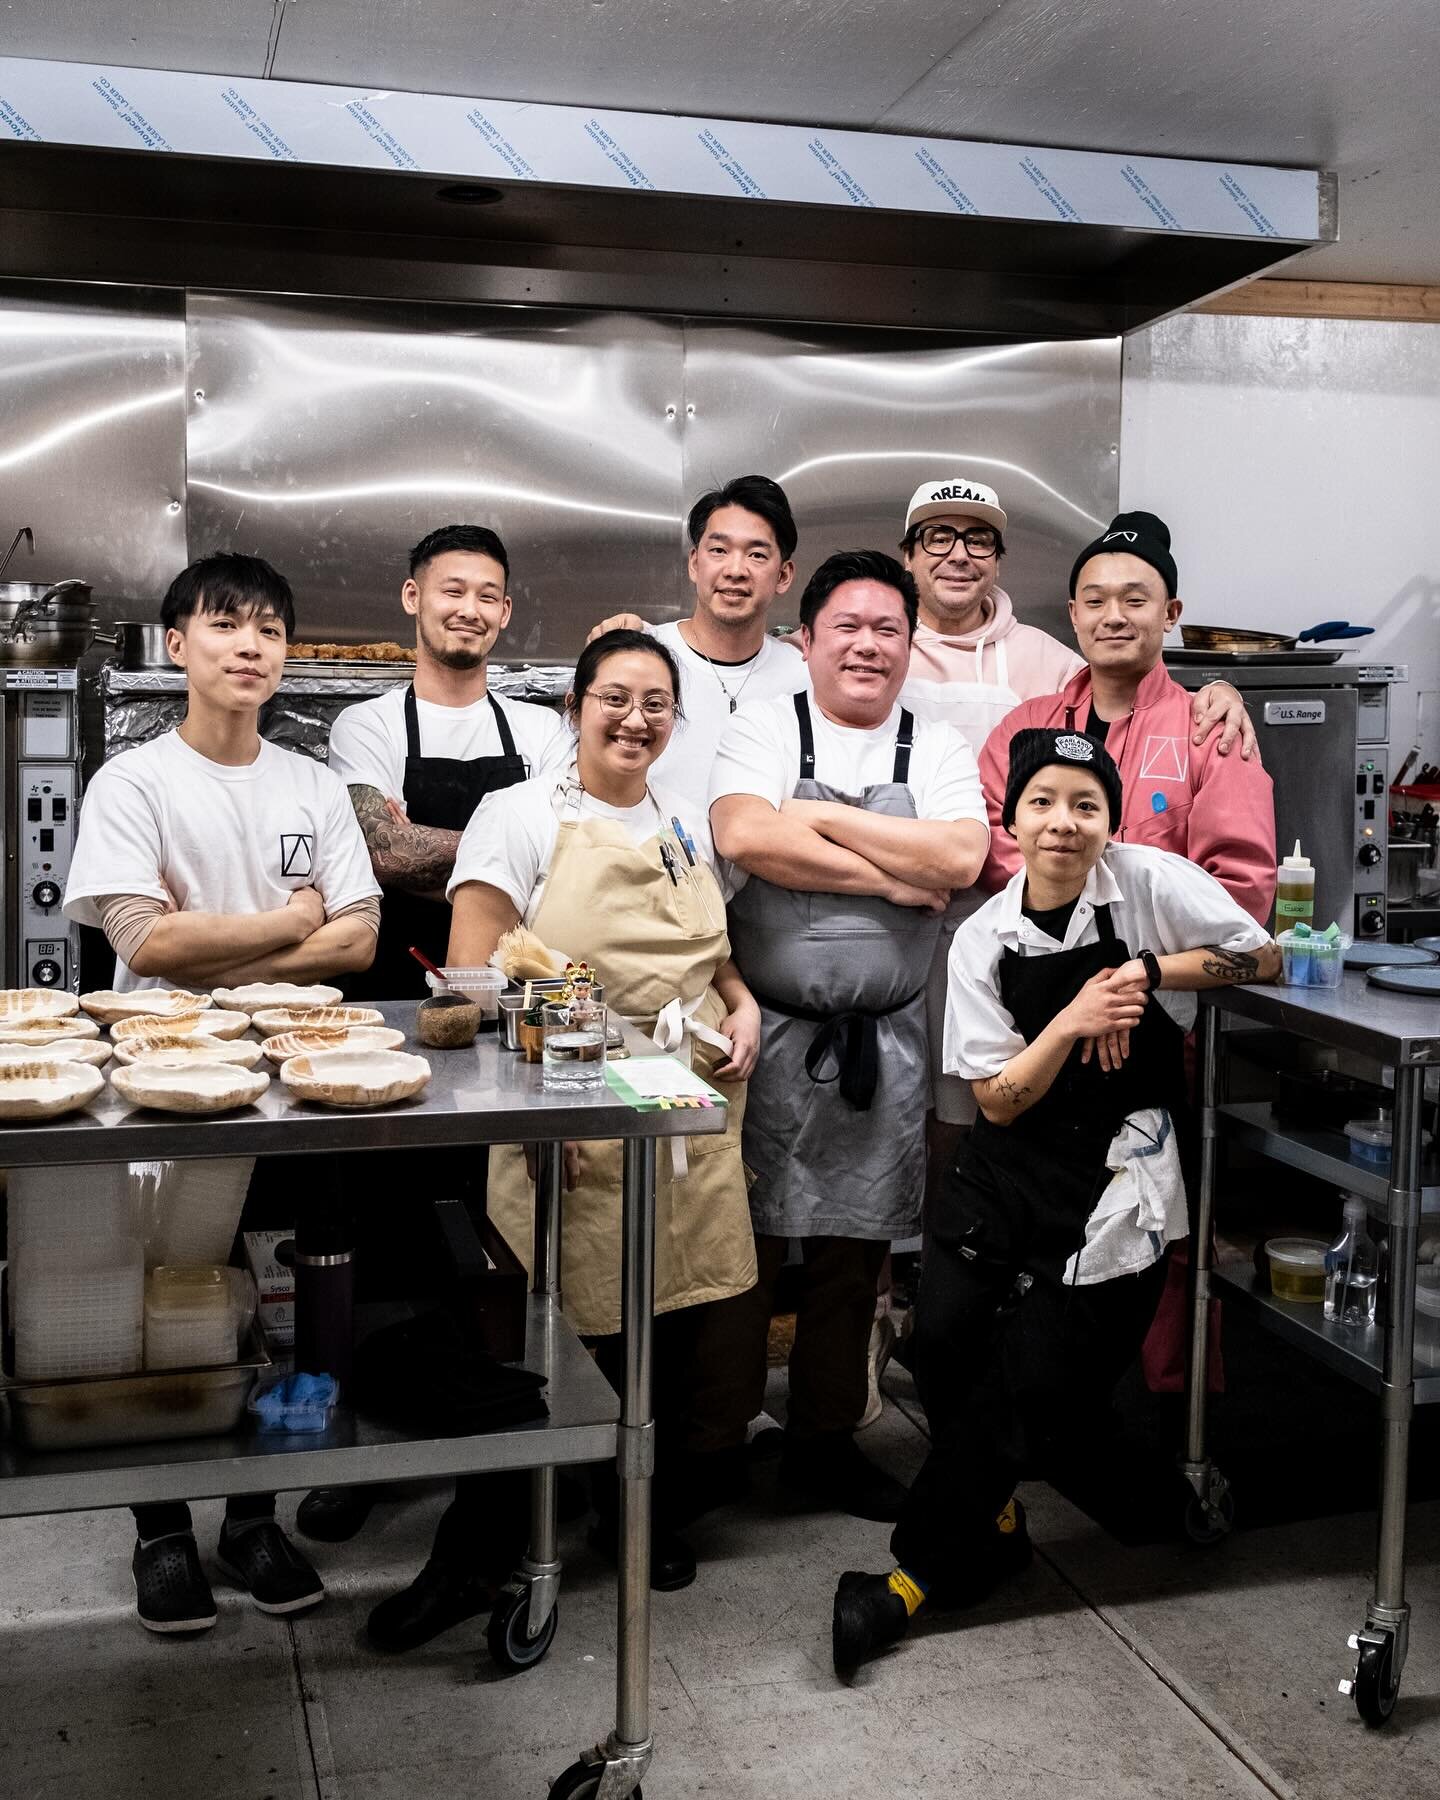 It has been a week and we are still smiling from the fun time we had at @rawalmondywg last weekend. Thank you once again to @mansands and everyone for your help 🙏🏼

#japanesefood #japanesecusine #rawalmond #chefofinstagram #chefsdinner #collaborati